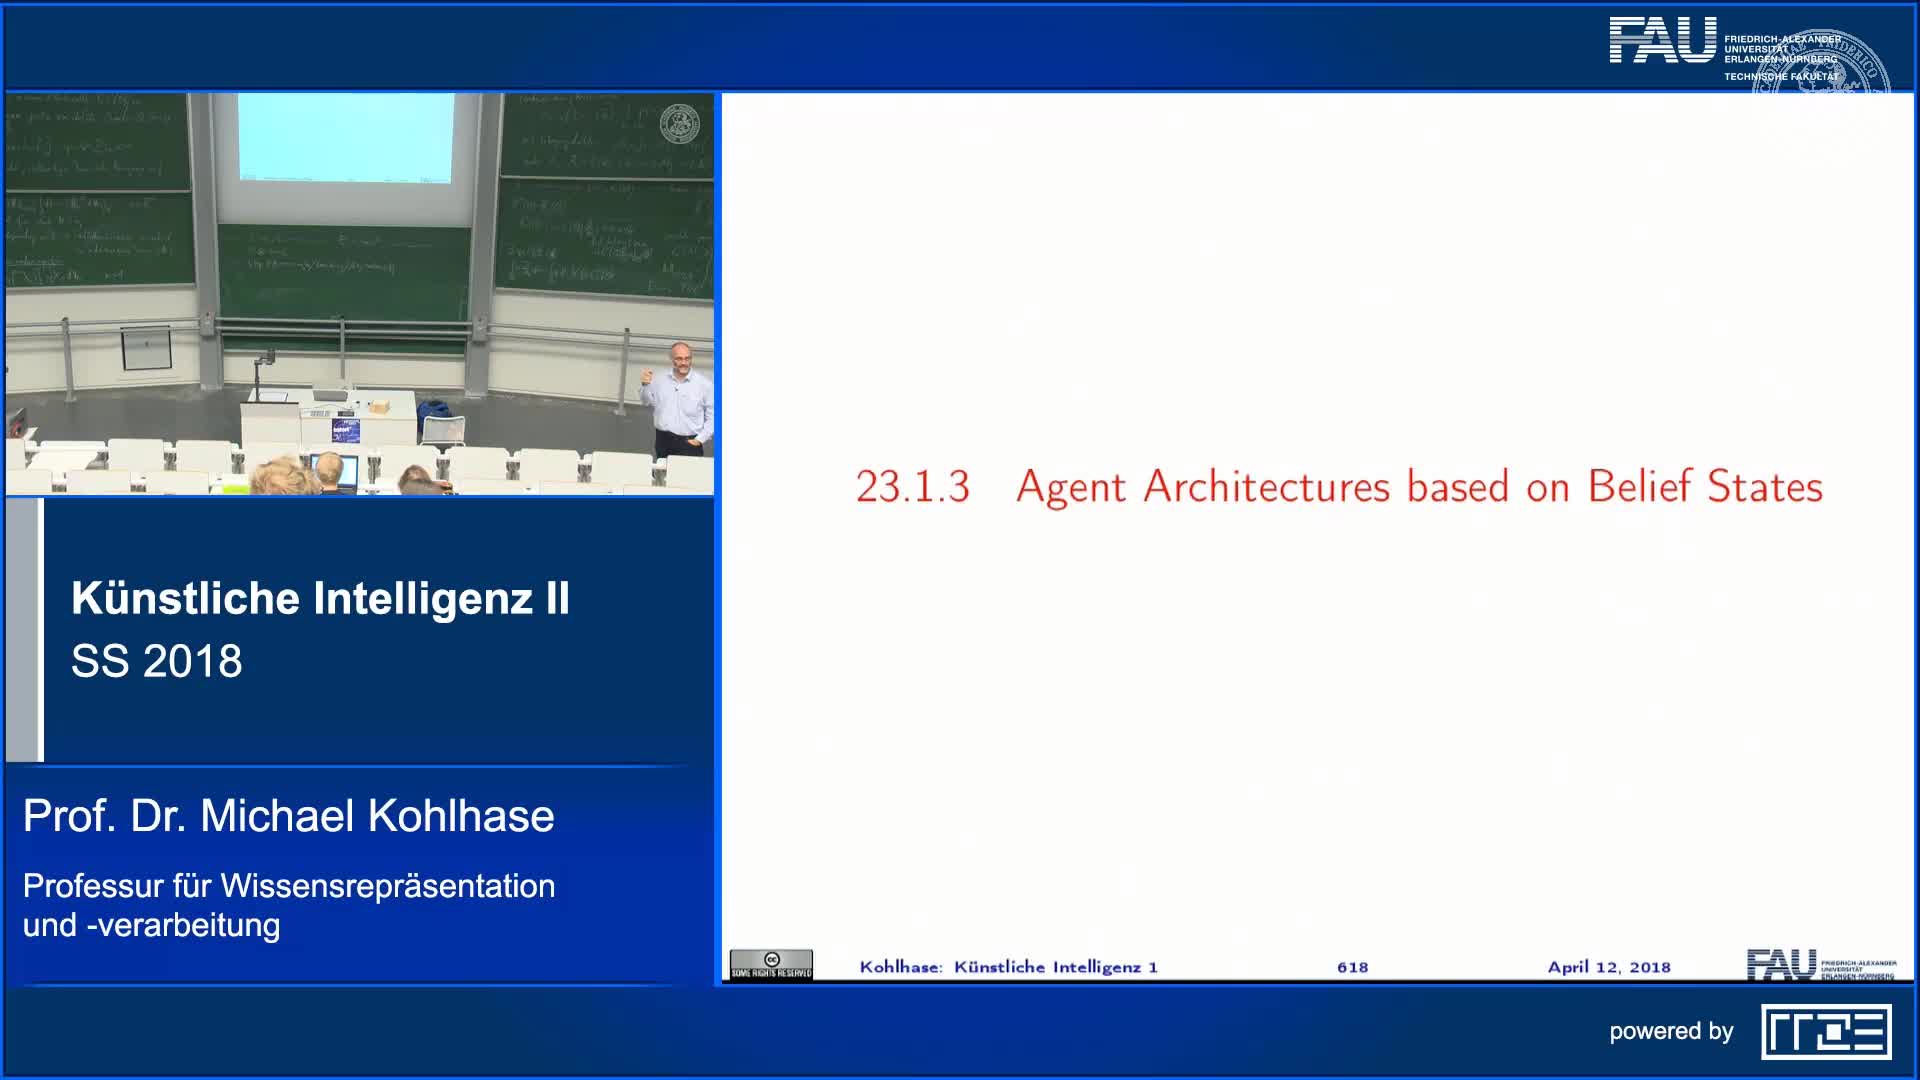 20.1.3. Agent Architectures based on Belief States preview image